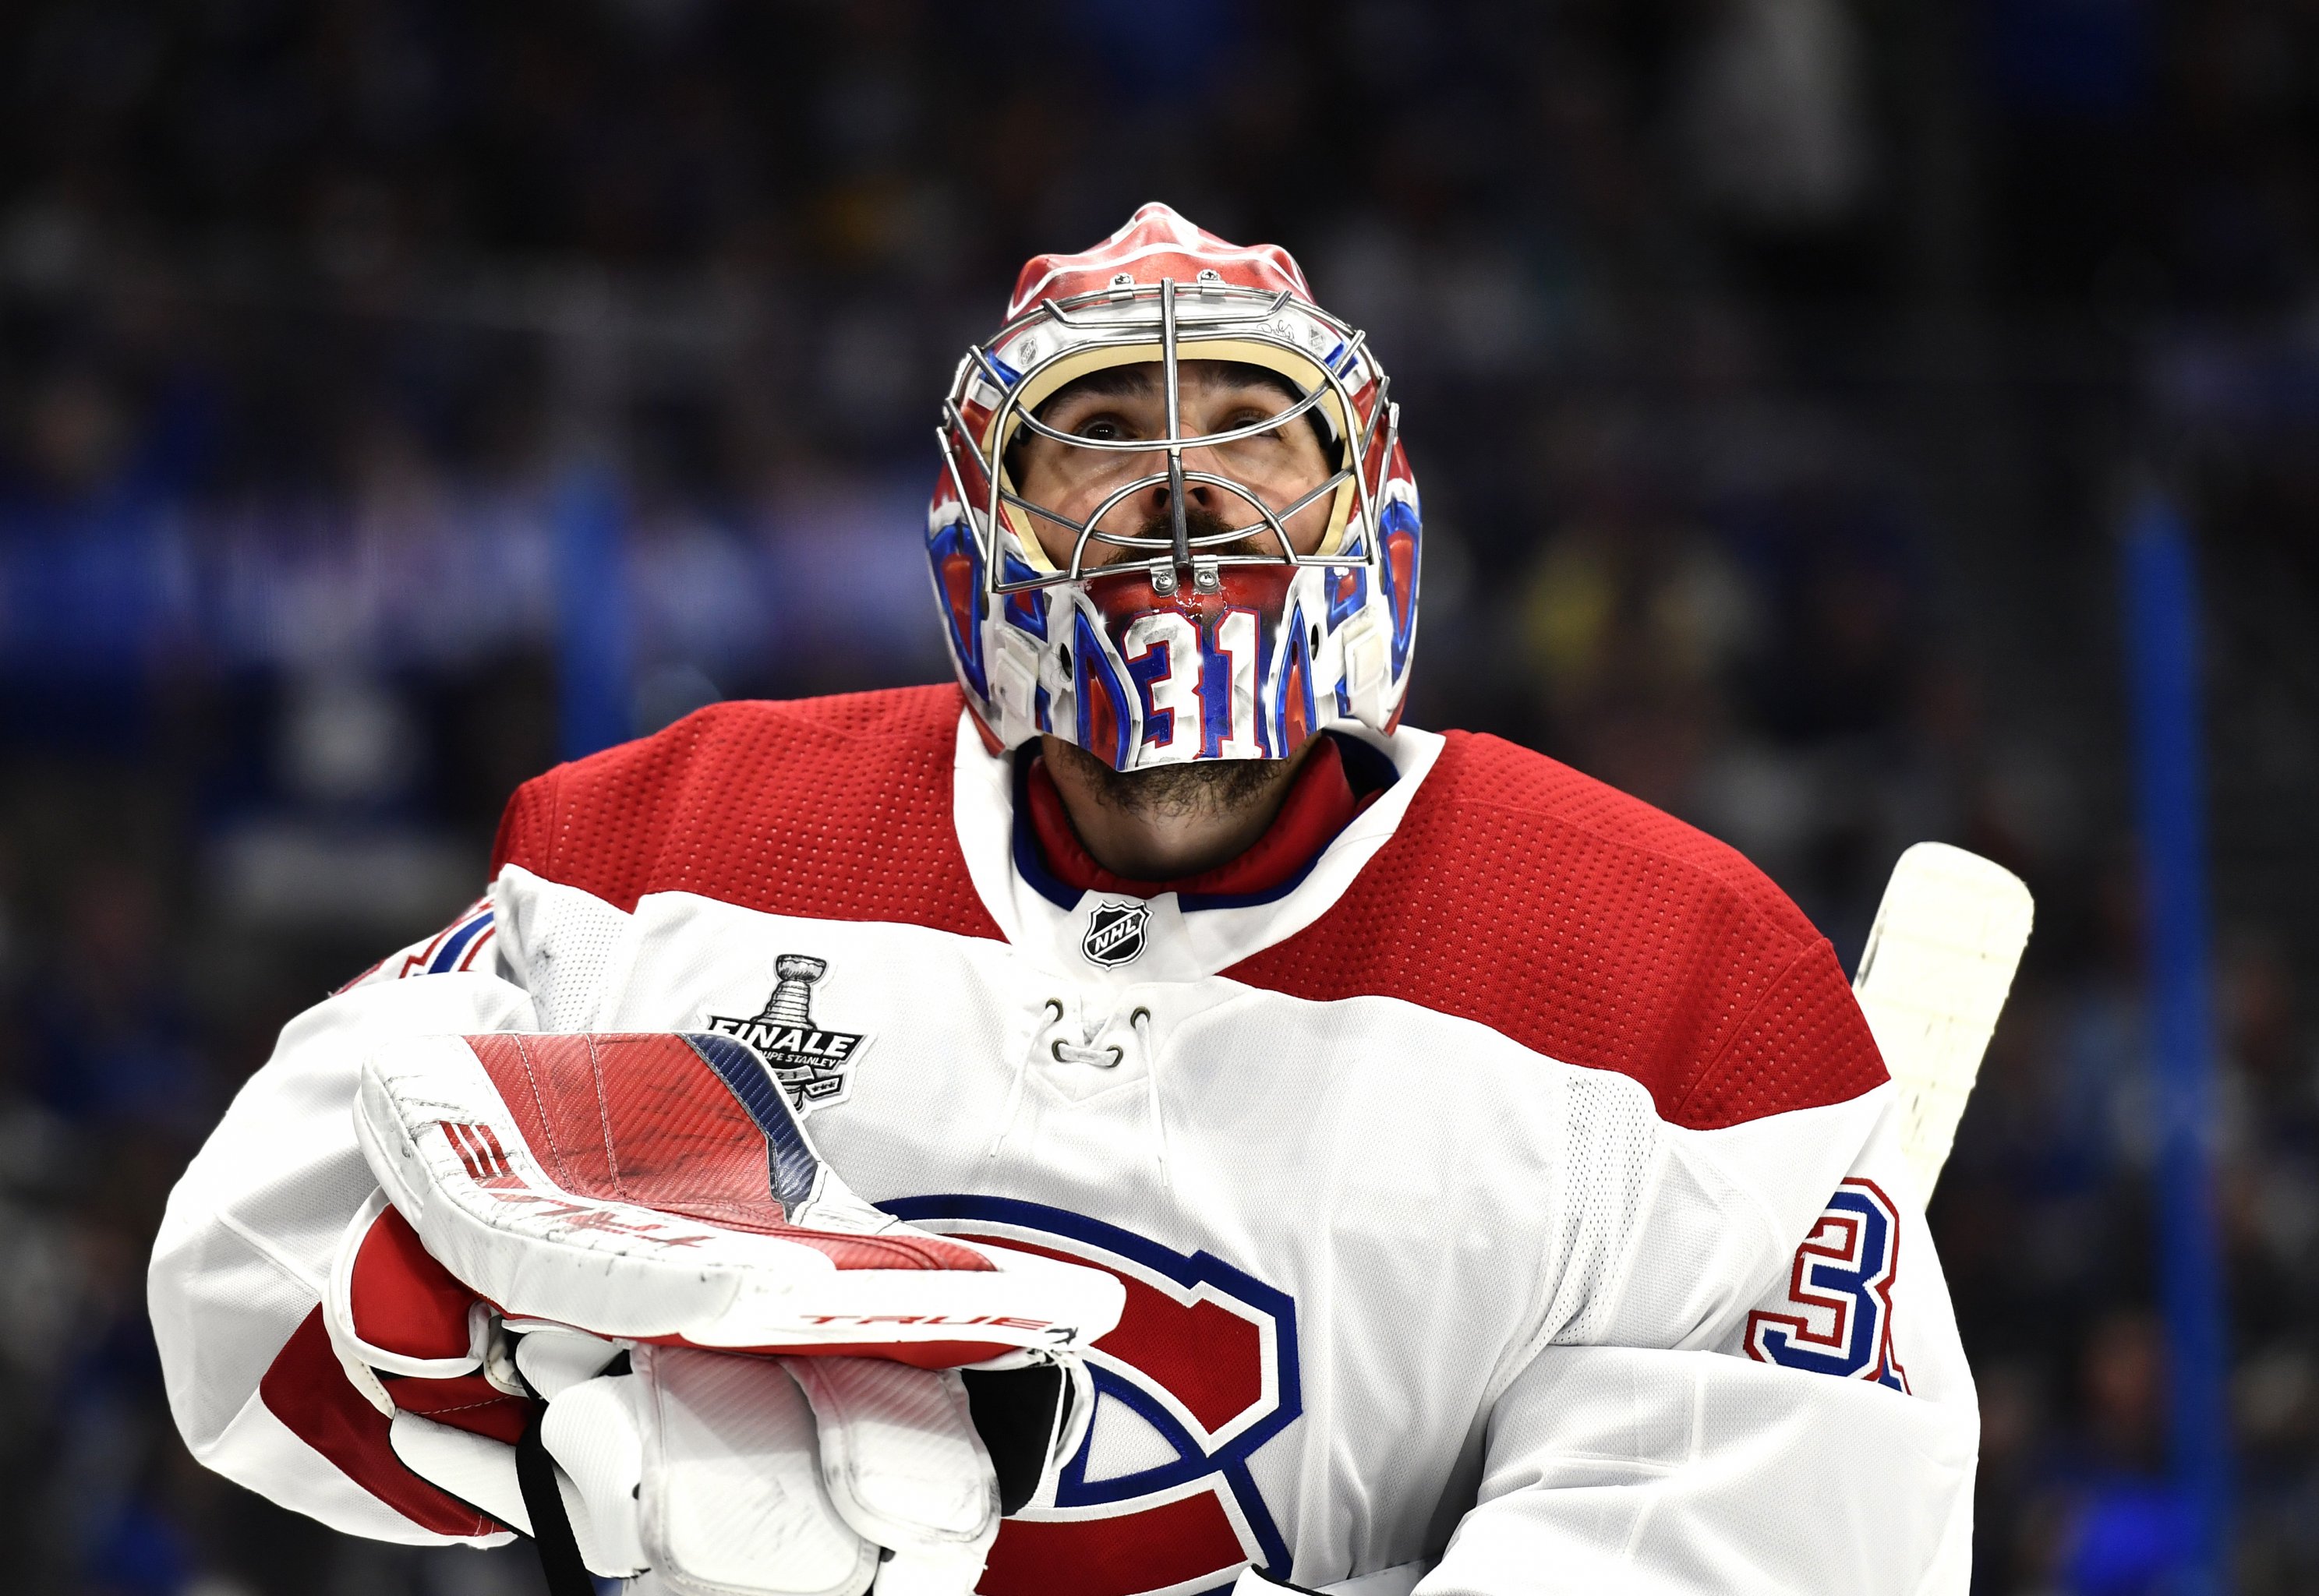 Lundqvist to Caps, goalie carousel spins in NHL free agency